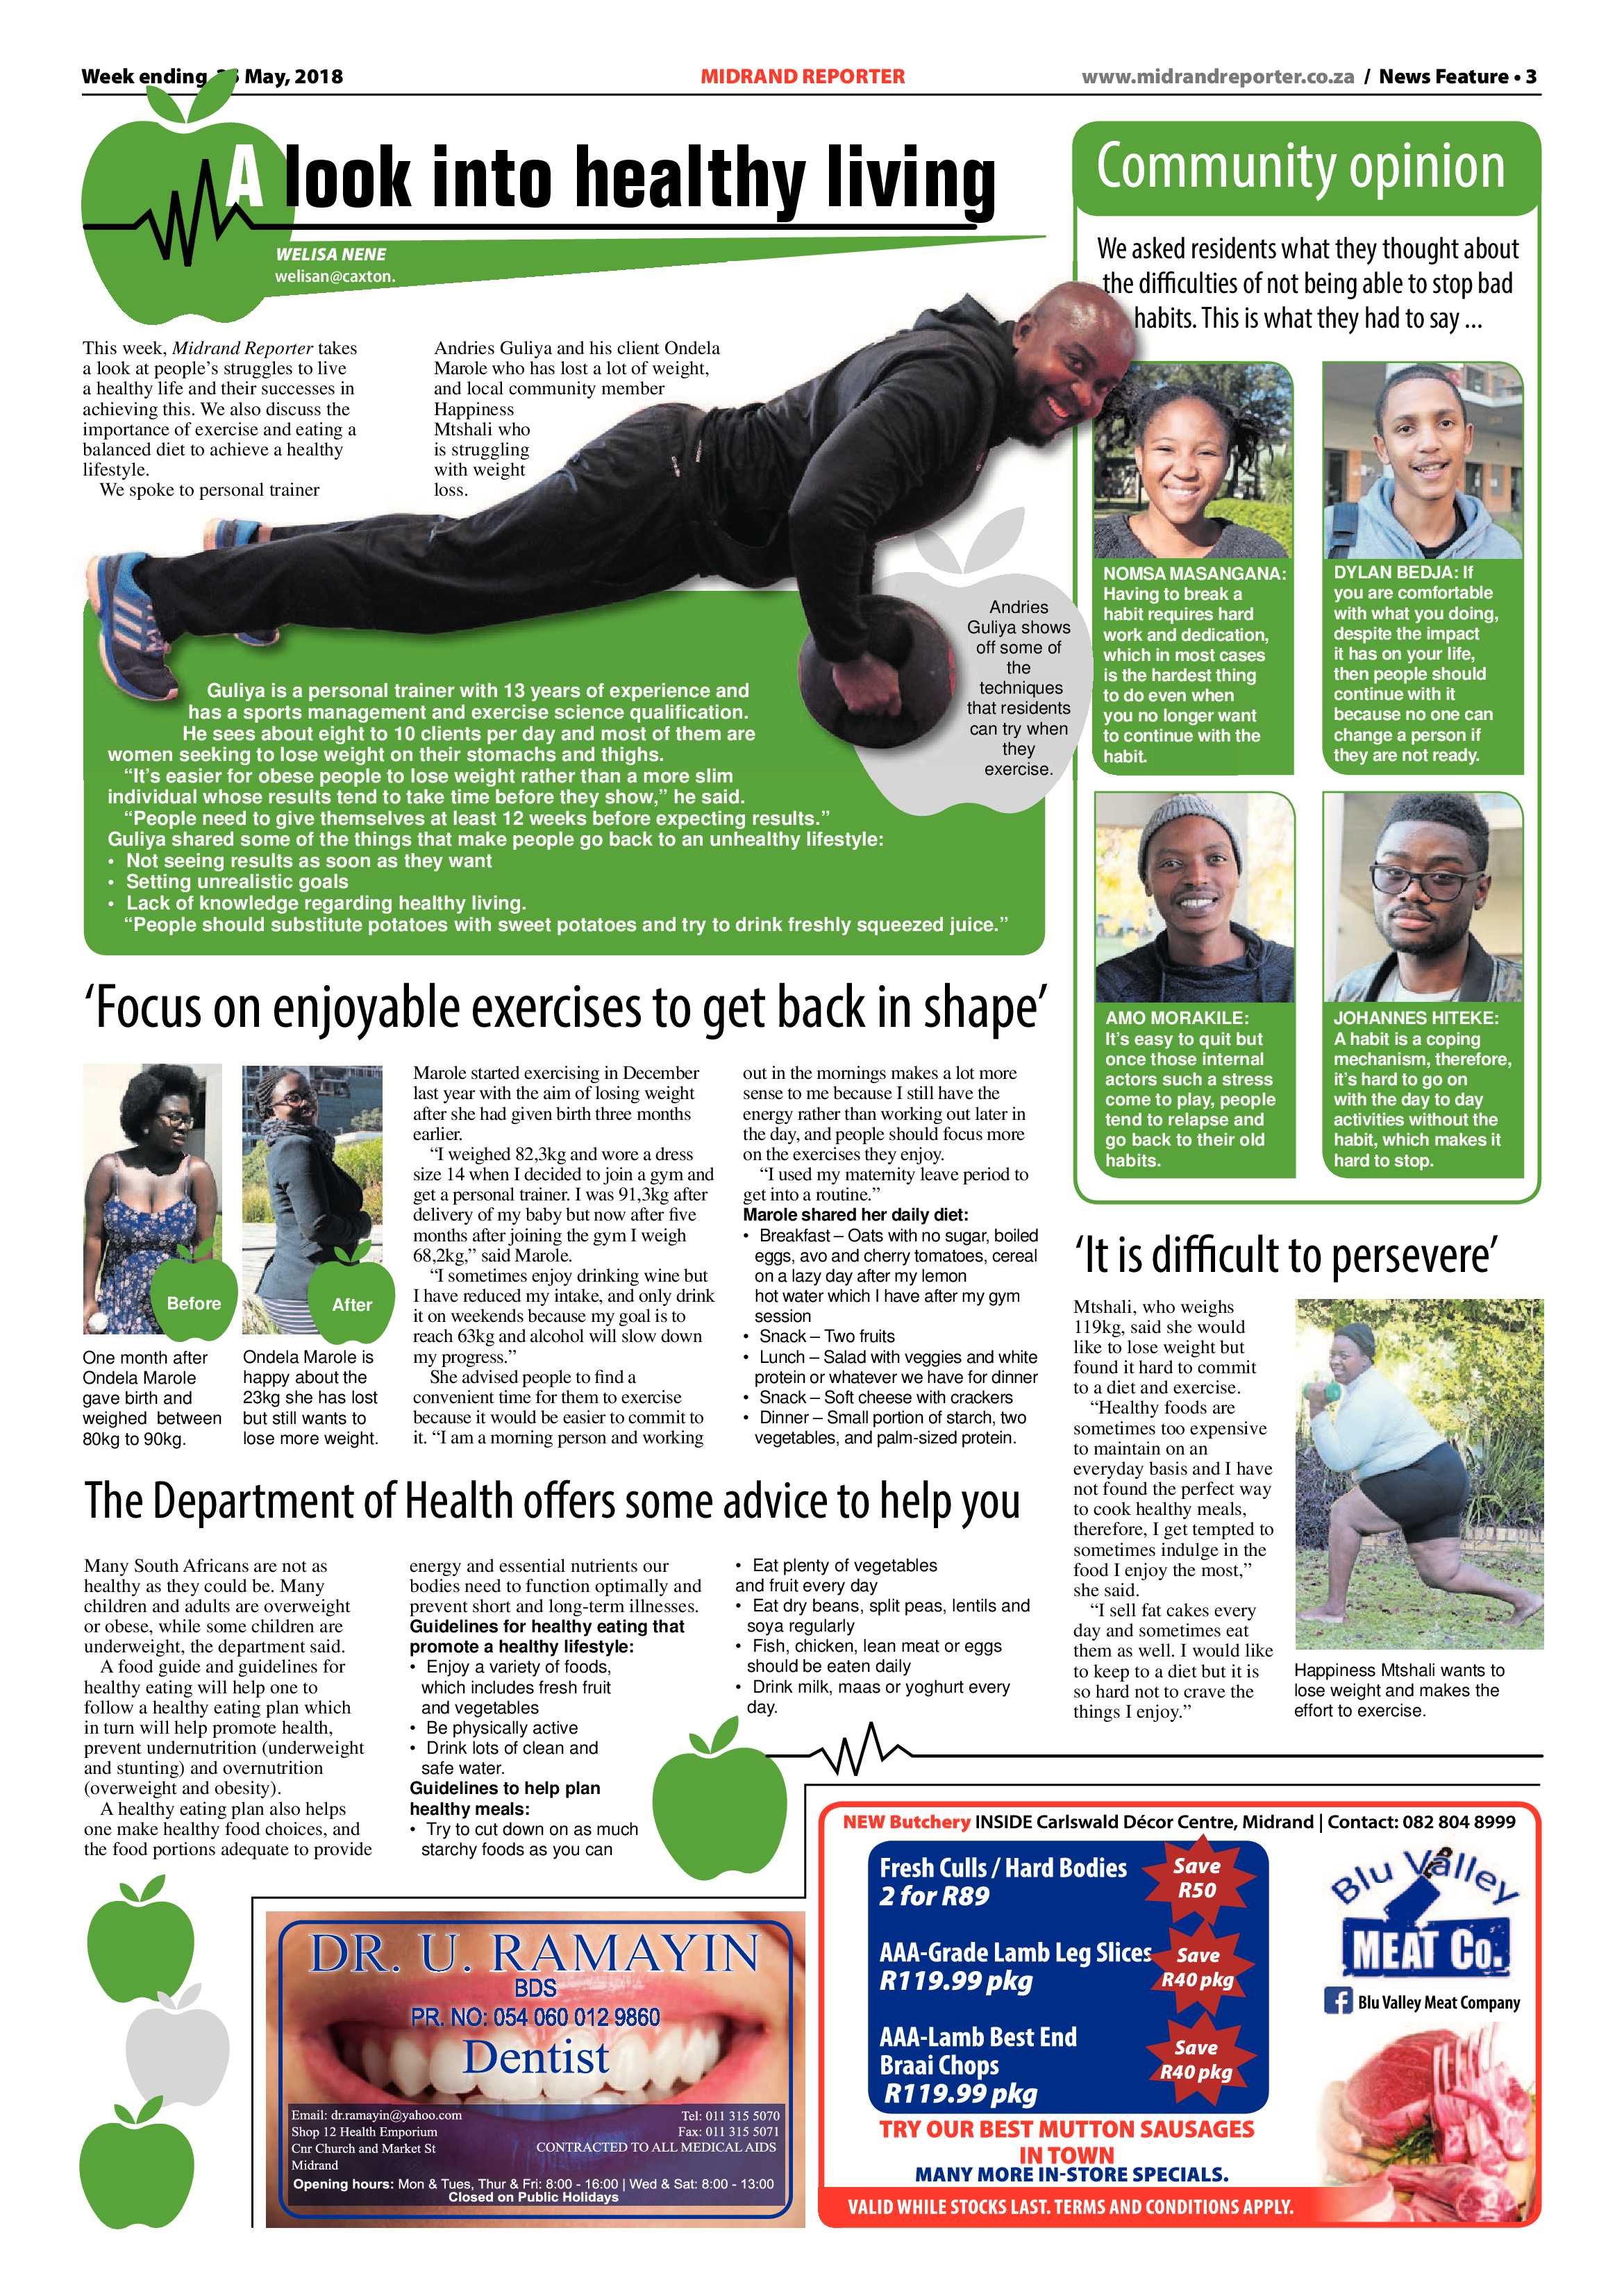 Midrand Reporter 25 May 2018 page 3